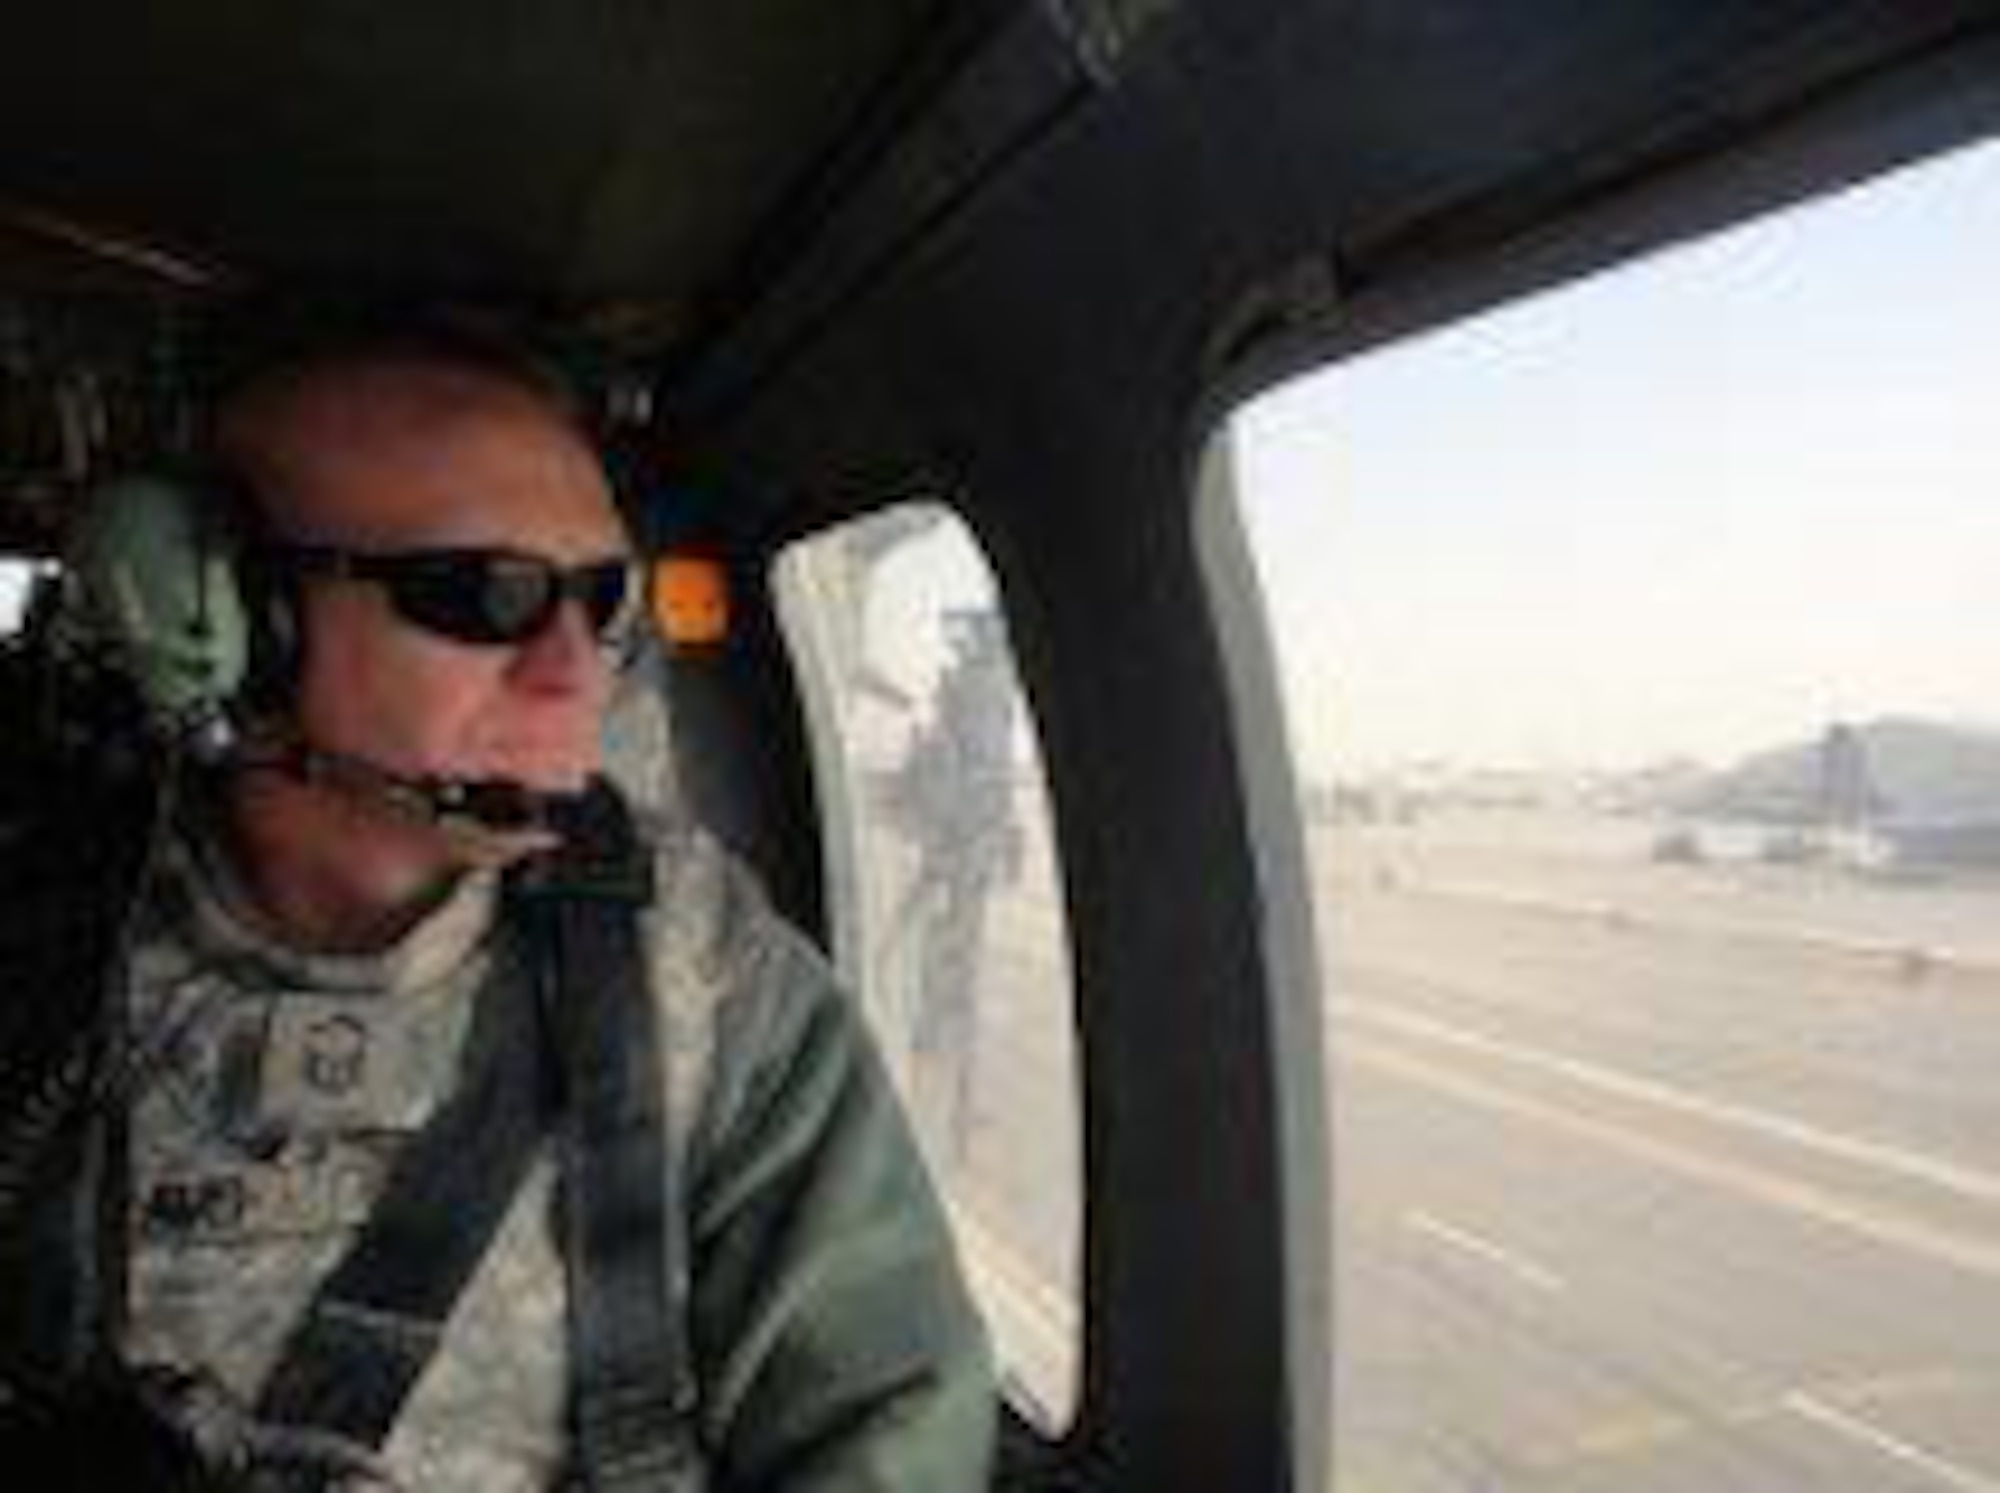 Senior Master Sgt. David Williams, 366th Security Forces Squadron operations superintendent, poses in a helicopter prior to a battlefield circulation, during his last deployment to Kandahar Airfield, Afghanistan. Williams was assigned as the 820th Base Defense Group security superintendent, where he streamlined International Security Assistance Force manpower requirements. He was also the battle captain managing joint force responses to indirect fire and improvised-explosive device attacks. (Courtesy photo)